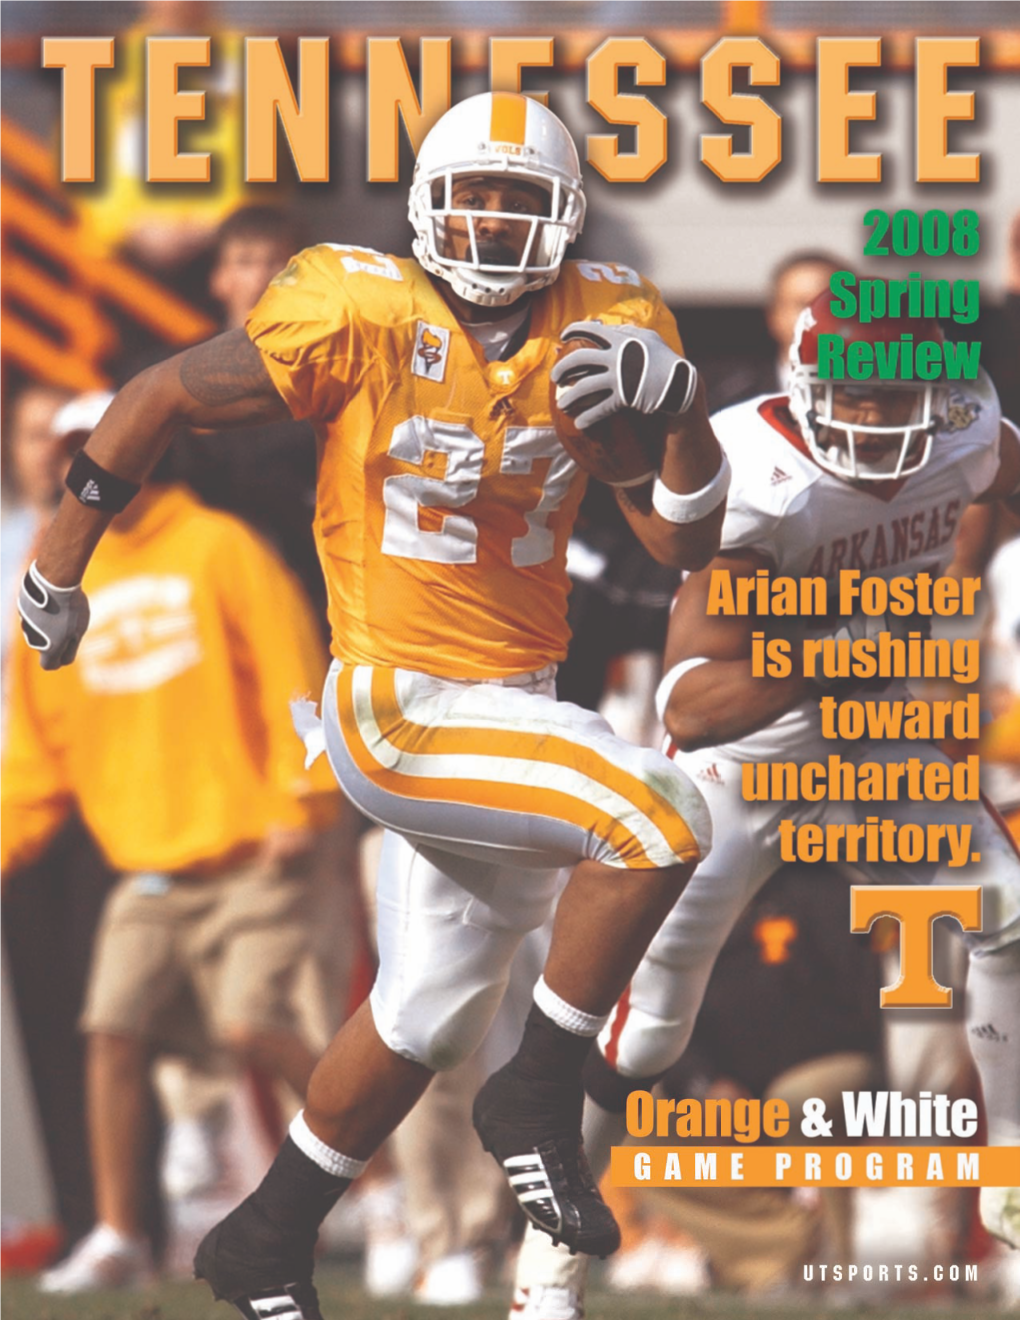 2008 Tennessee Football Notes